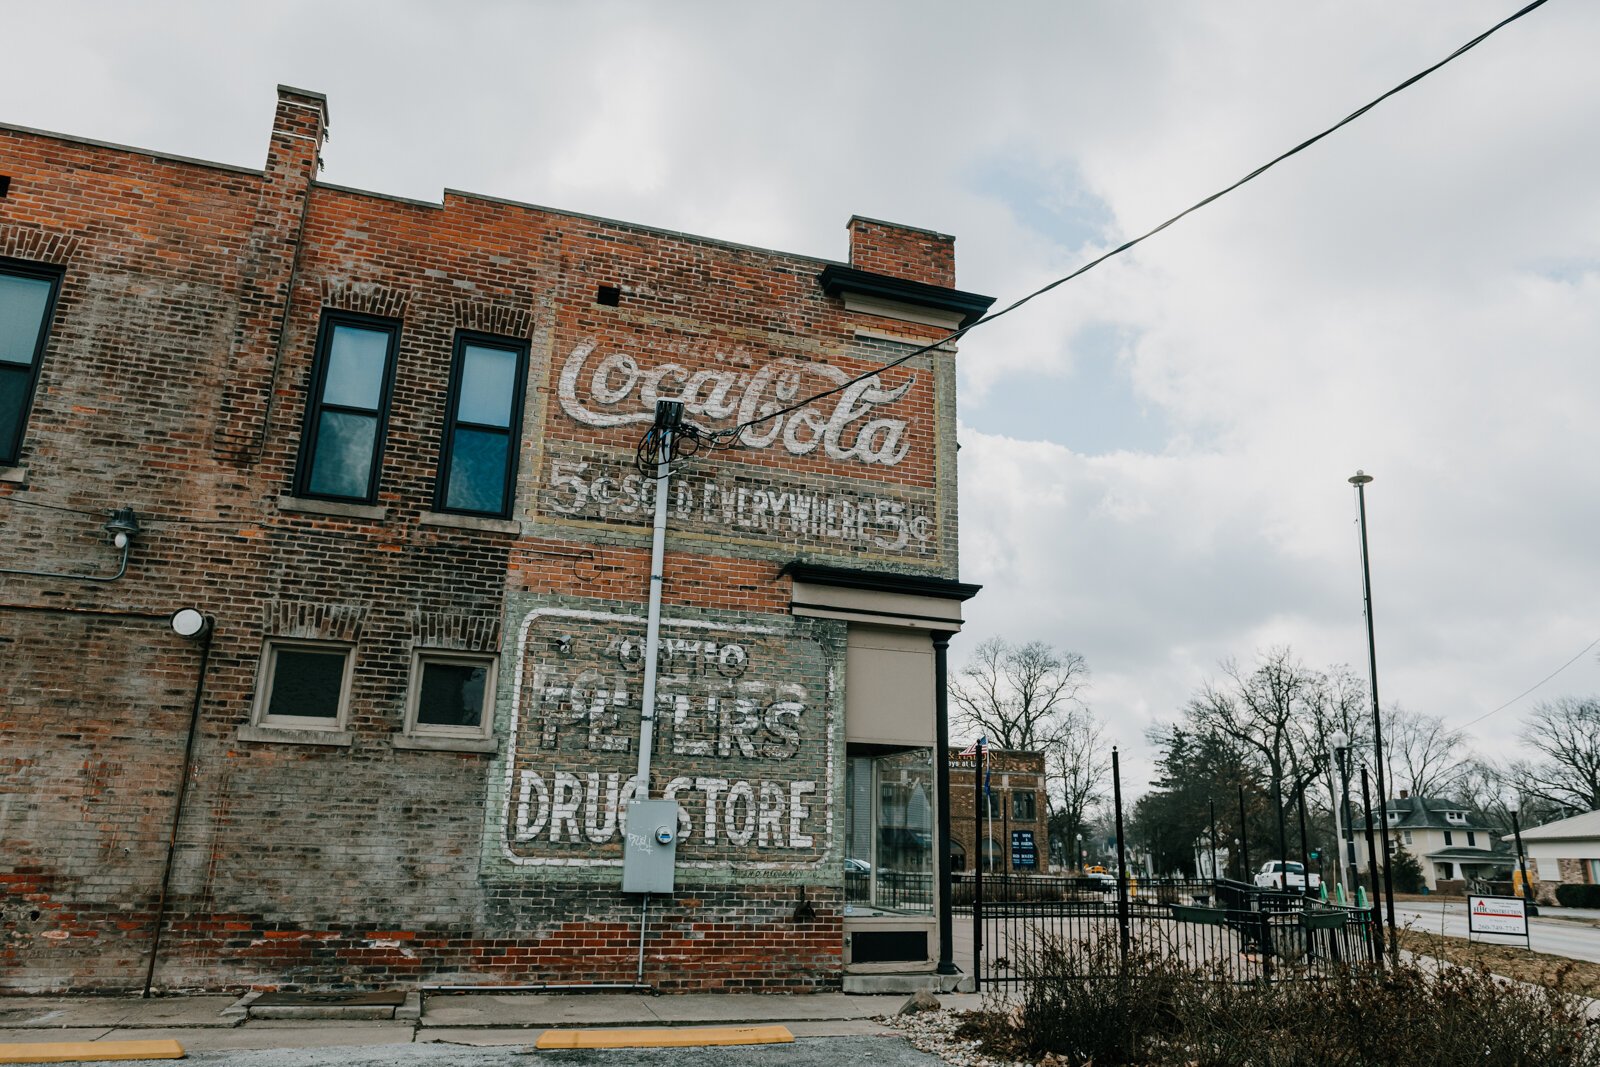 A ghost sign can be seen at 2725 Broadway, which used to house Trubble Brewing. The sign reads Otto Peters Drugstore and contains an advertisement for Coca Cola. 